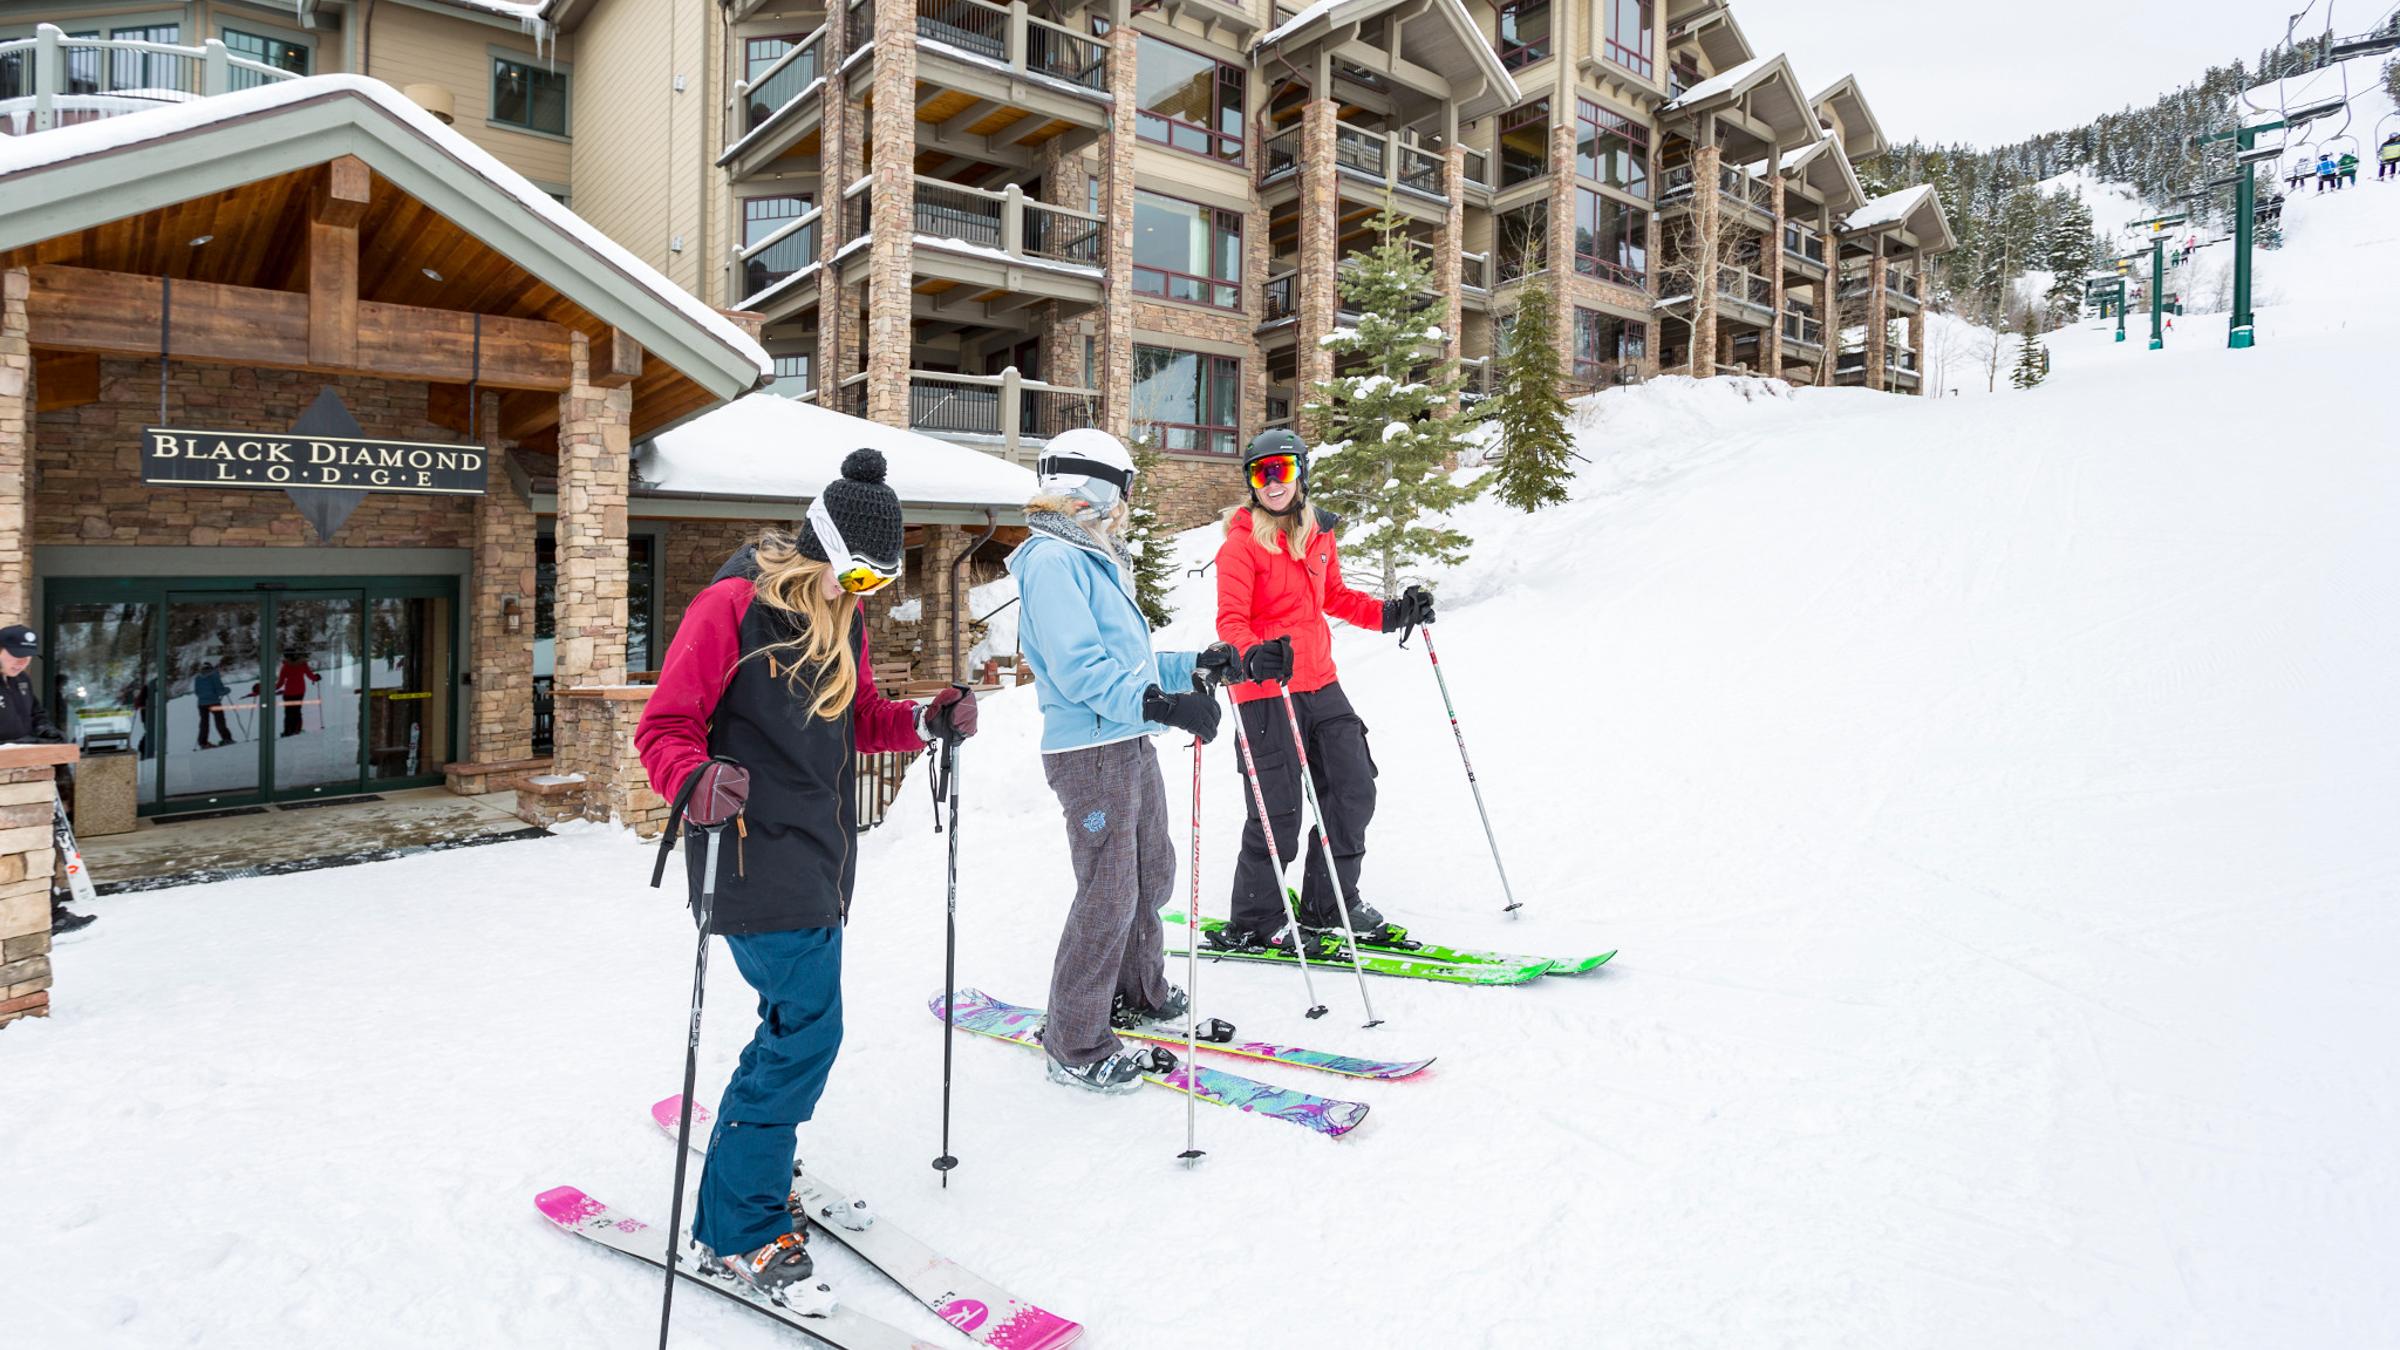 Guests putting their skis on outside of Black Diamond Lodge